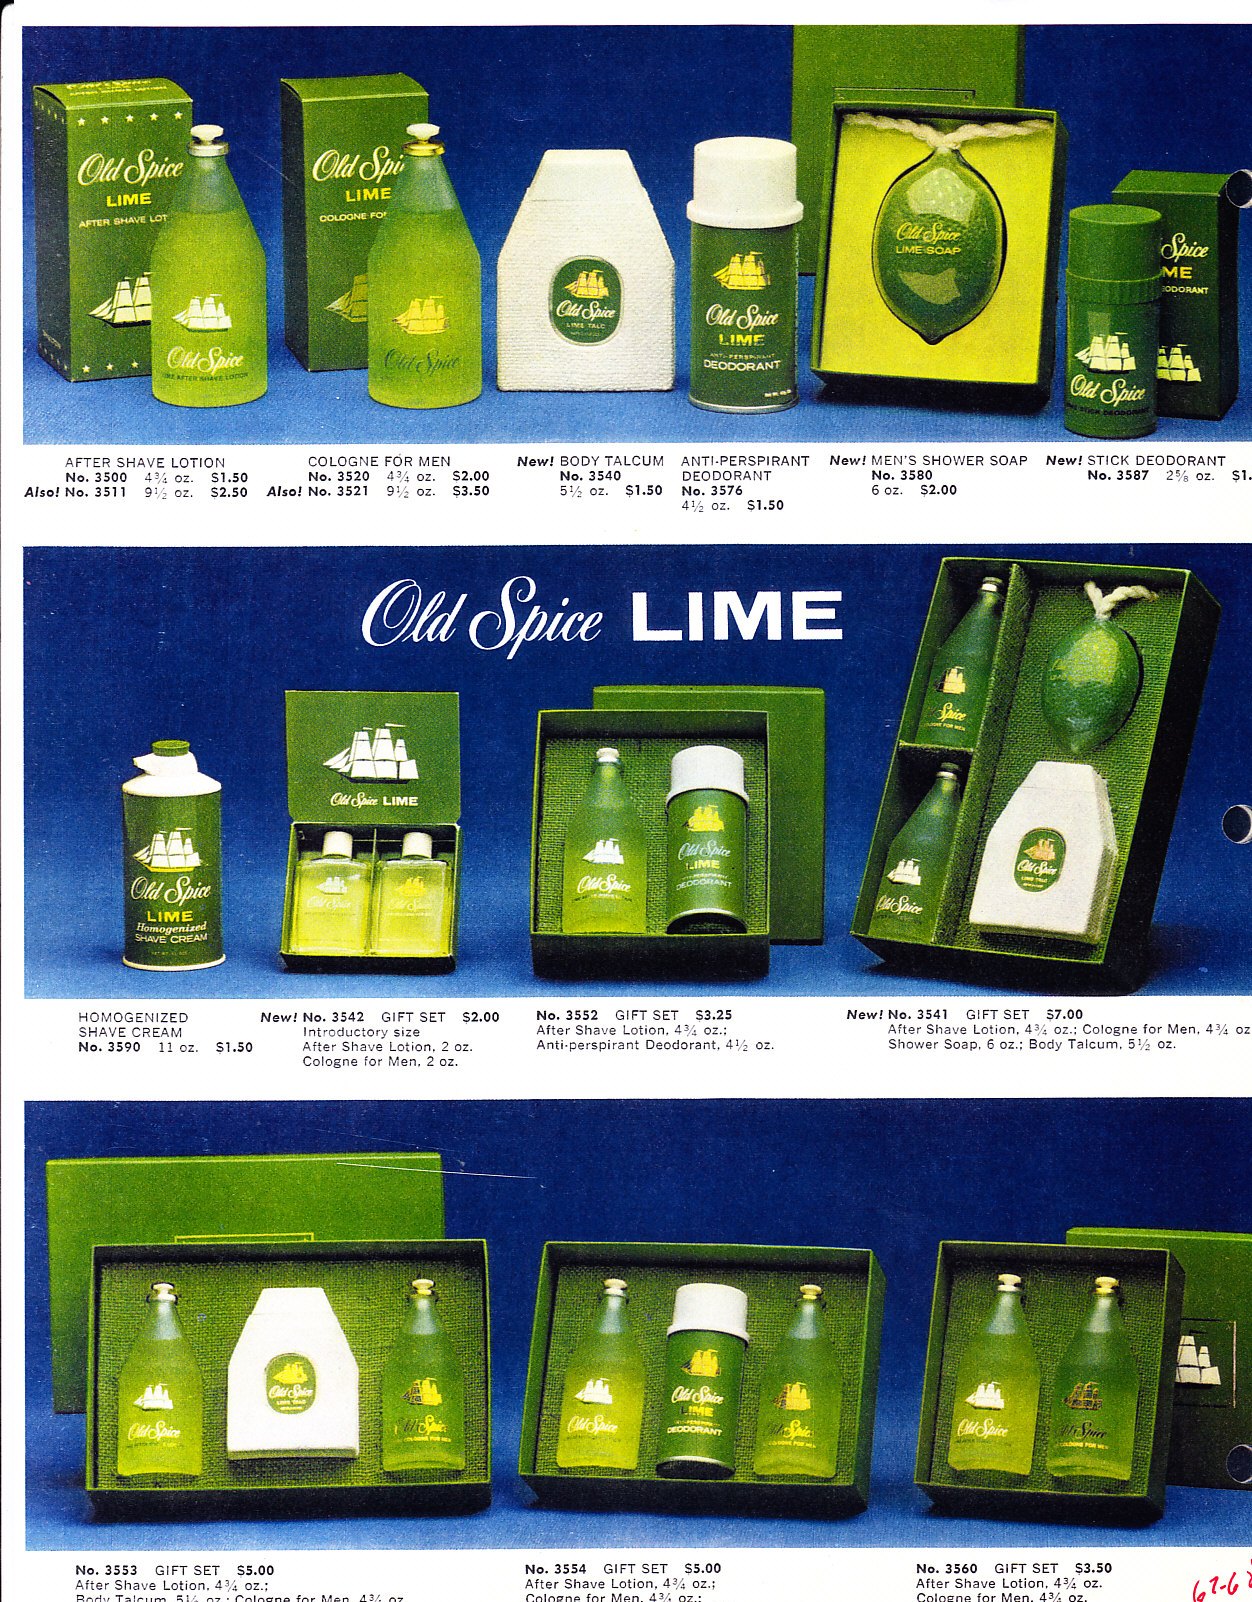 old spice lime